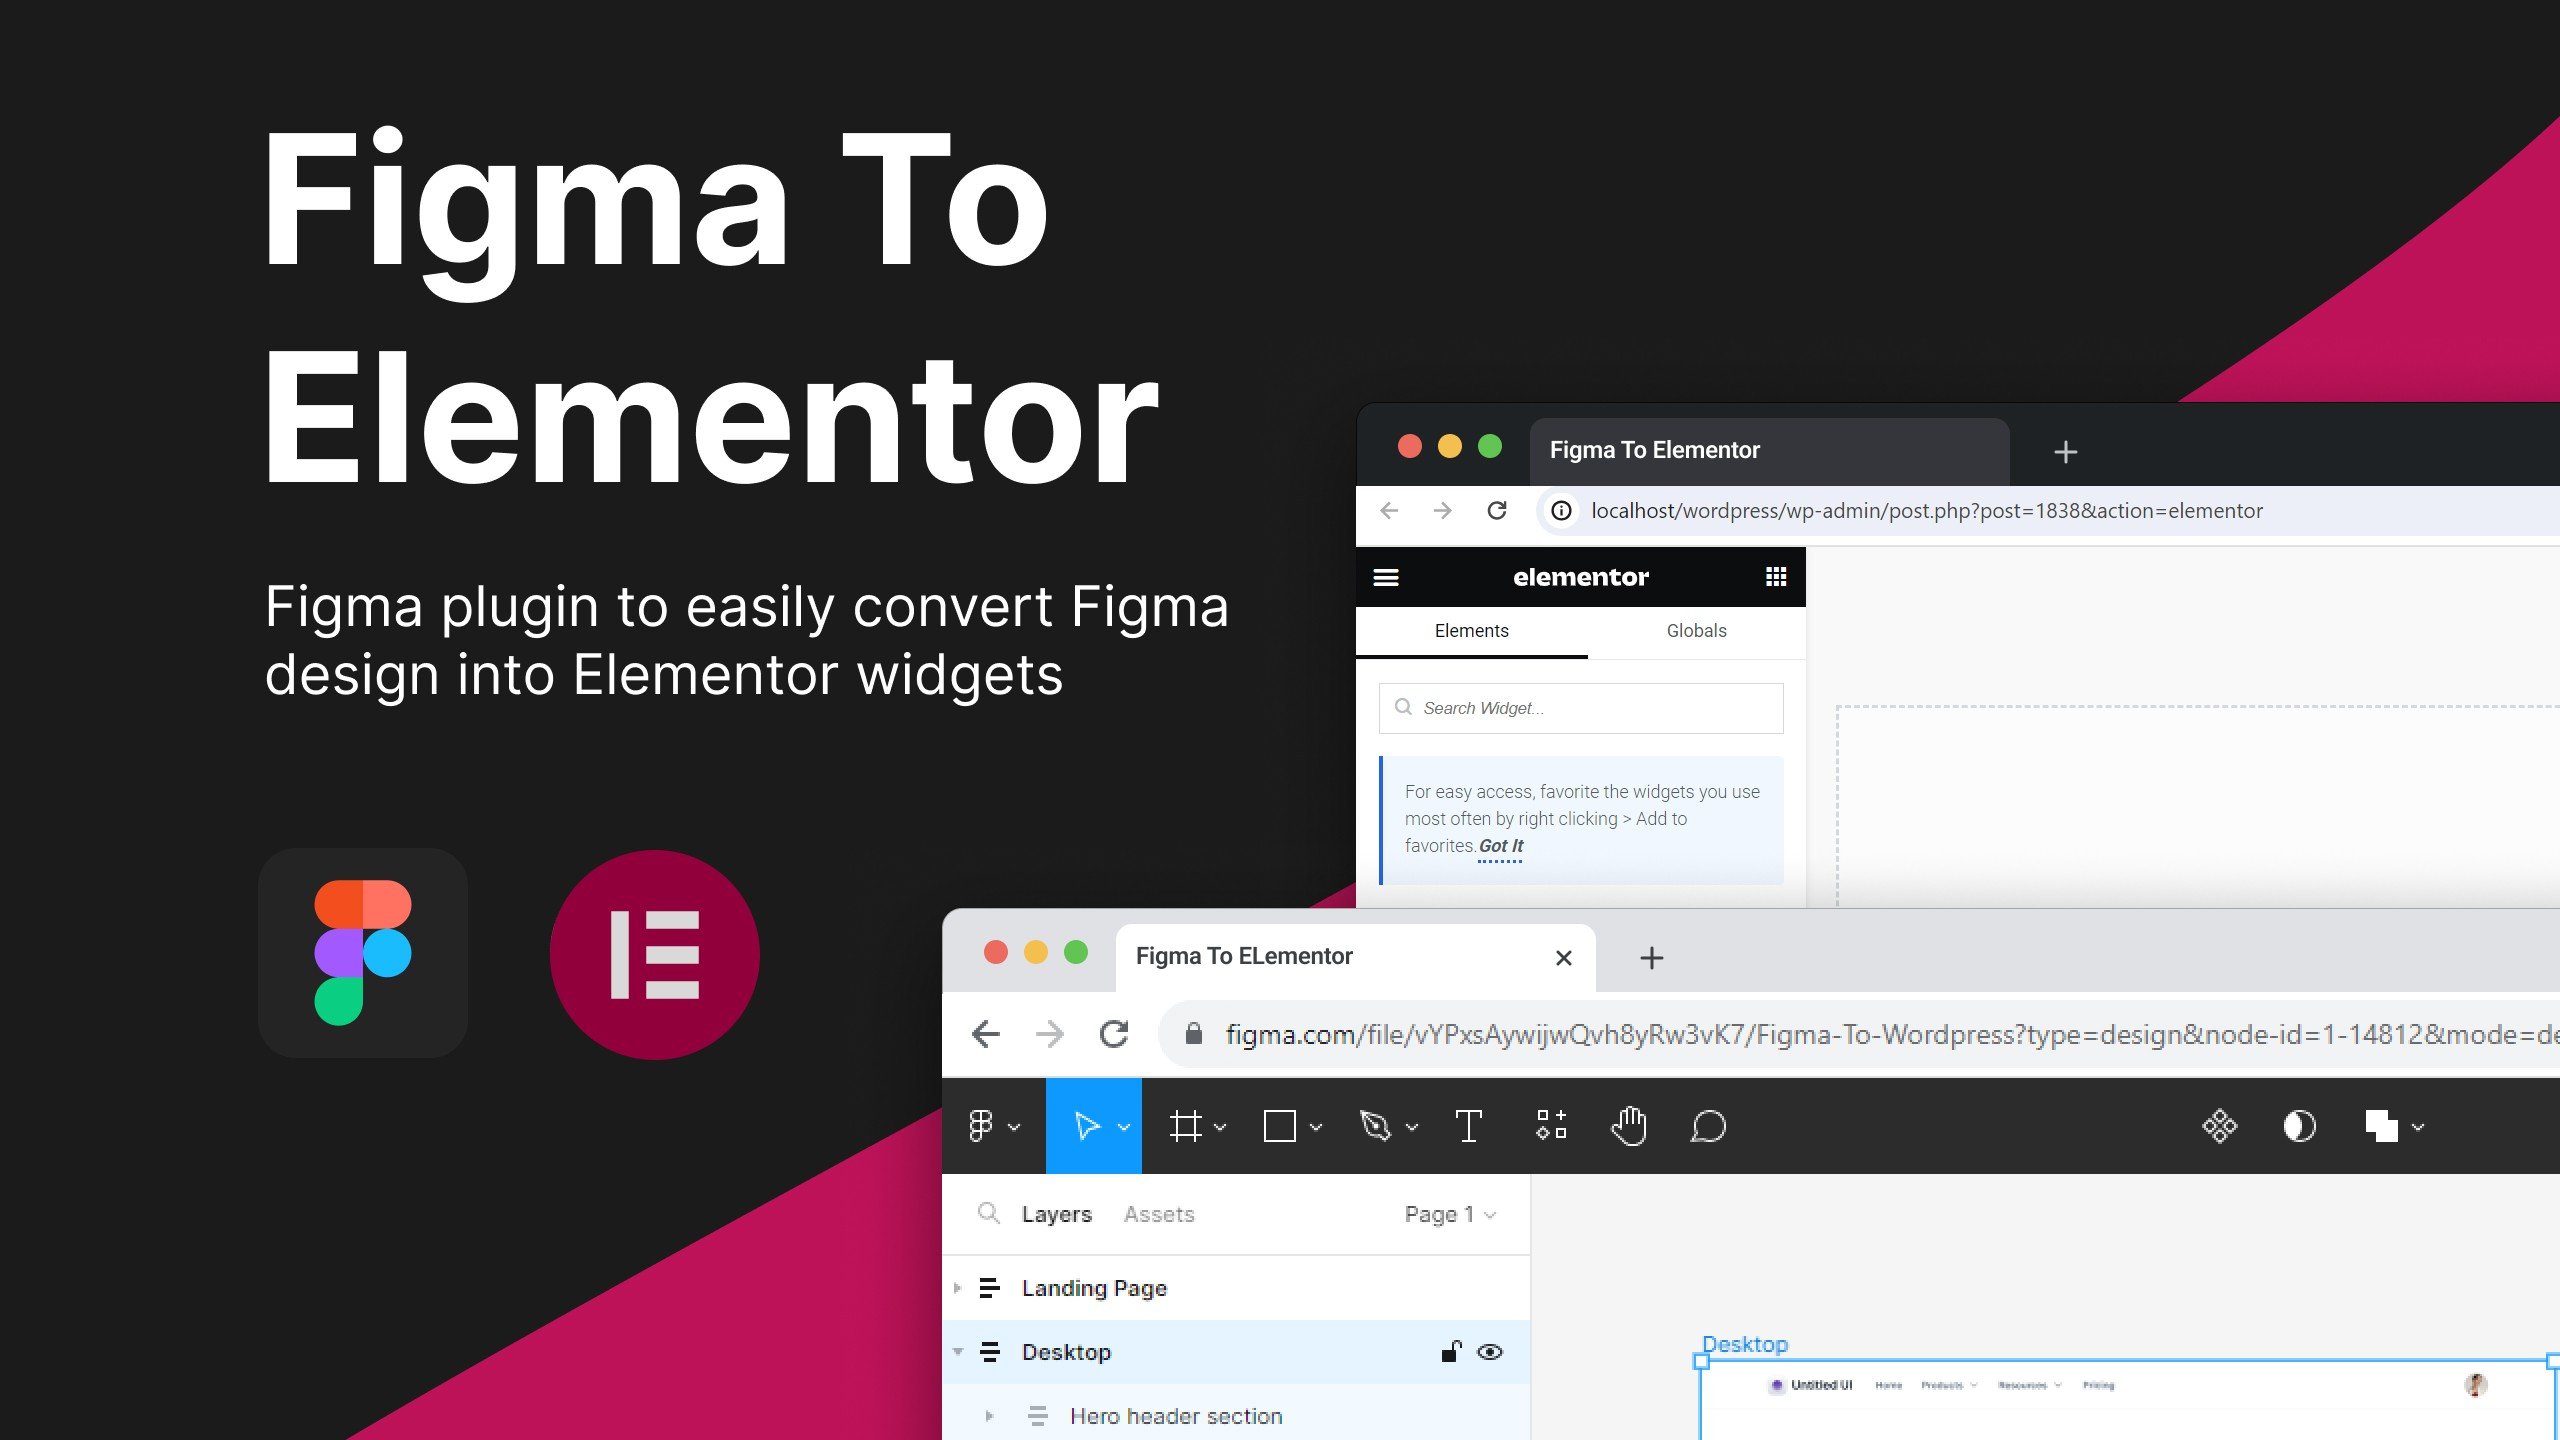 Figma To Elementor